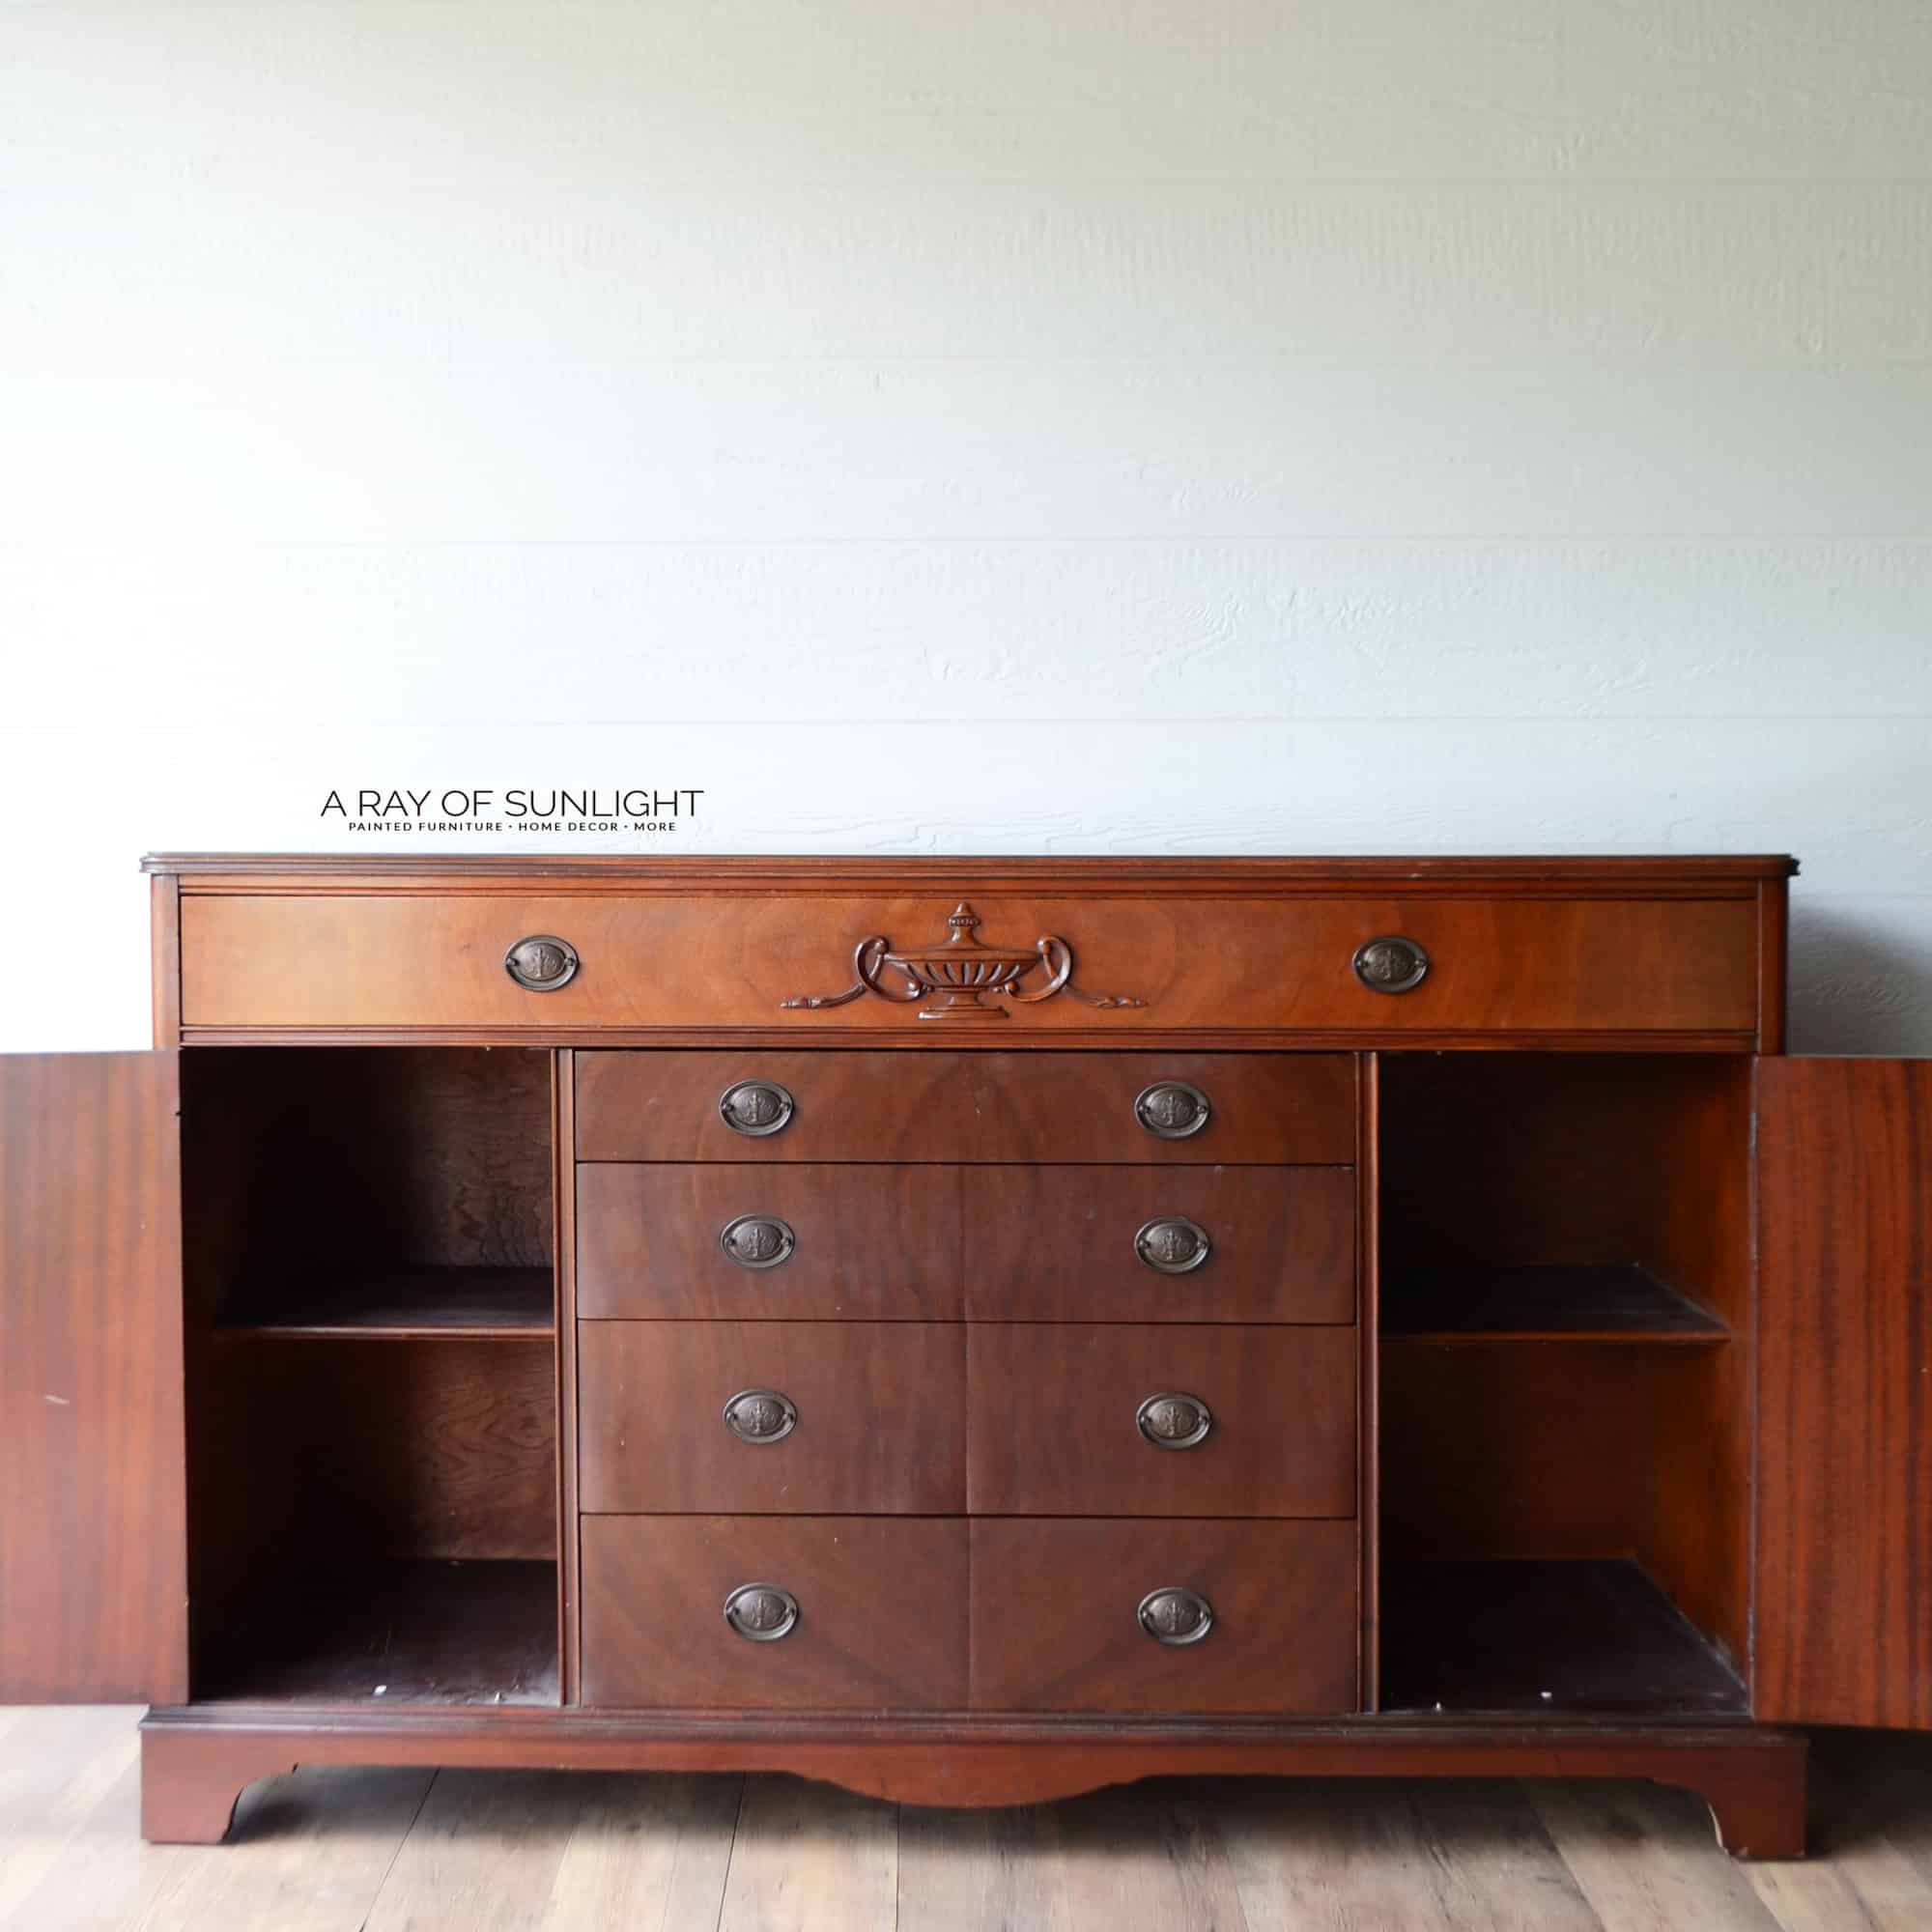 Vintage Buffet | Ready to Paint Inventory Available for customization by A Ray of Sunlight #paintedfurniture #diyfurniture